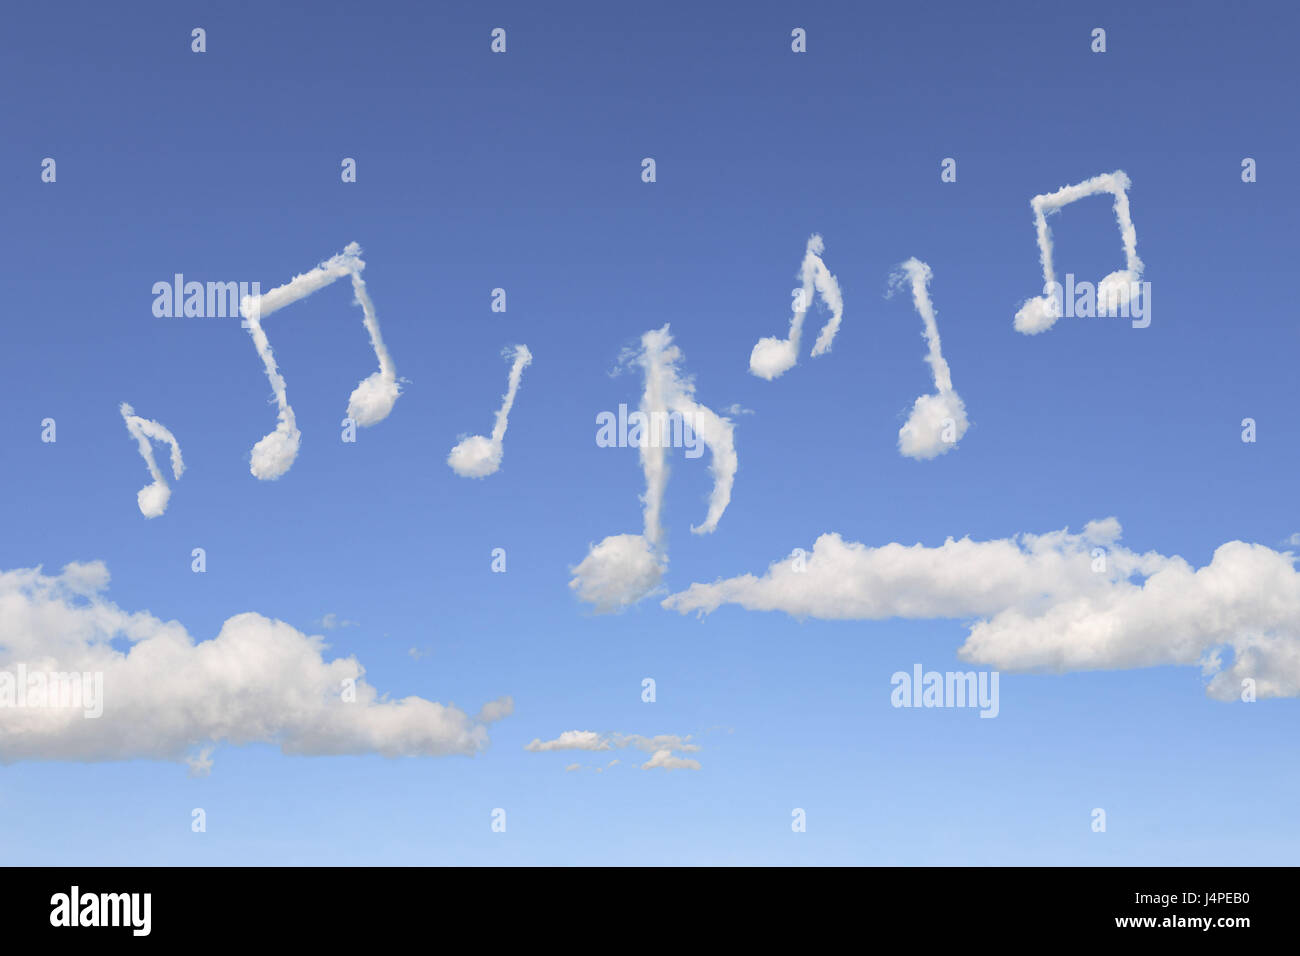 Heaven, blue, cloud formation, musical notes, icon, character, Stock Photo